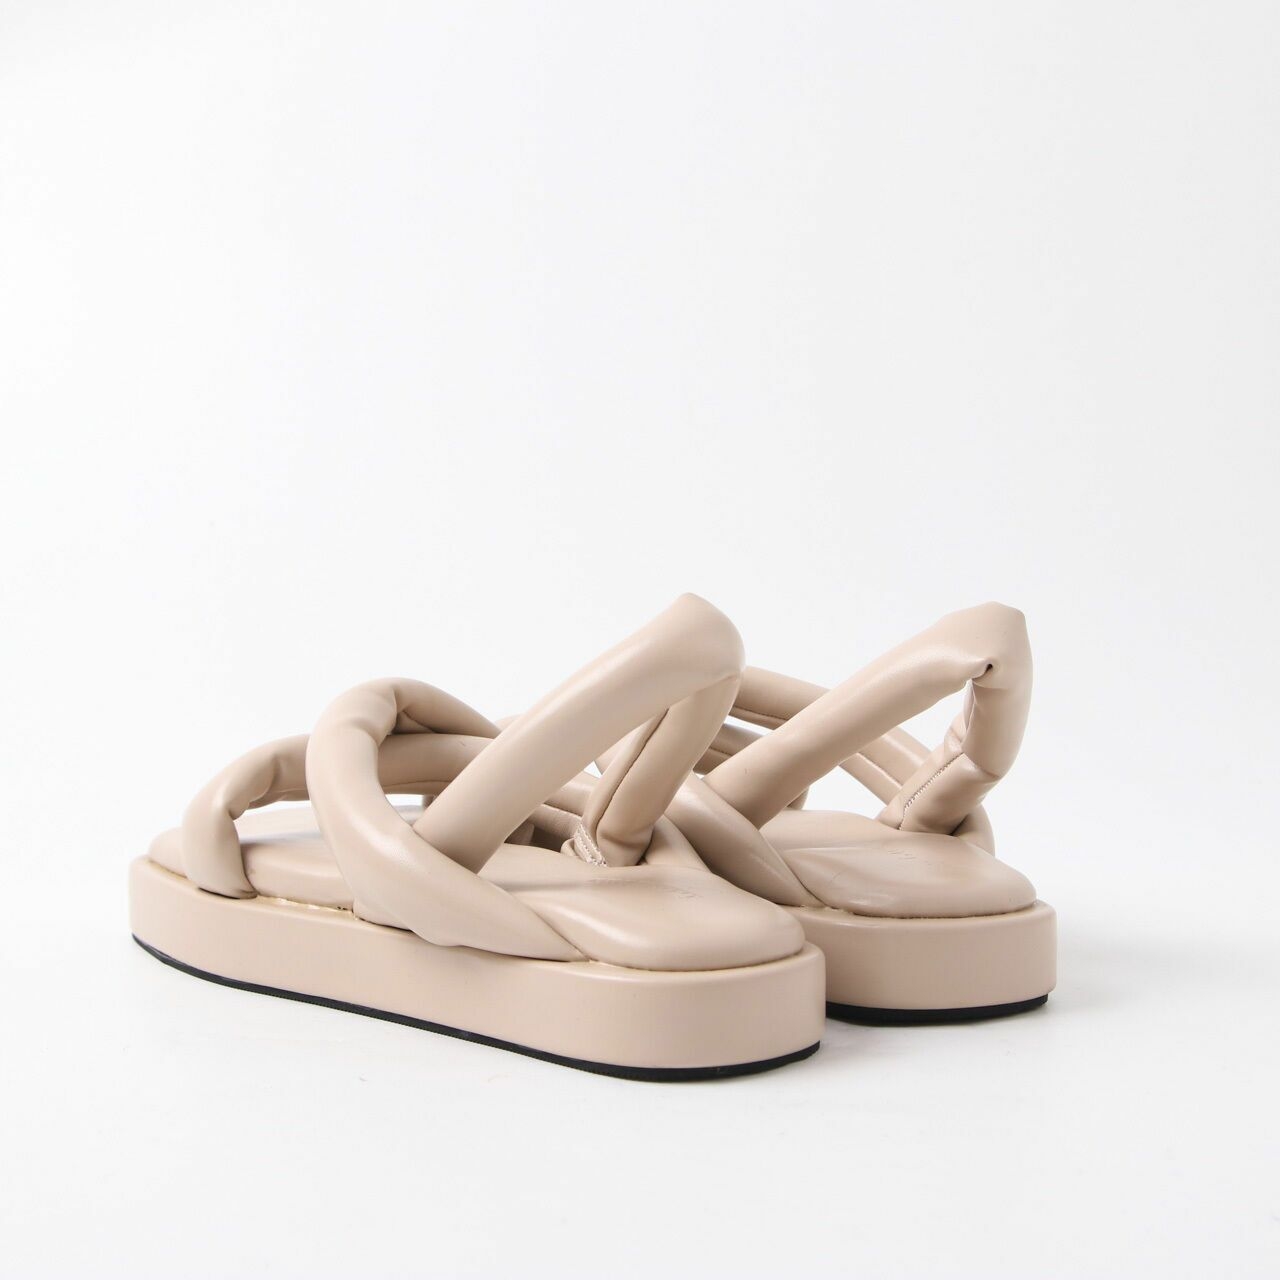 LIMITED Nude Sandals